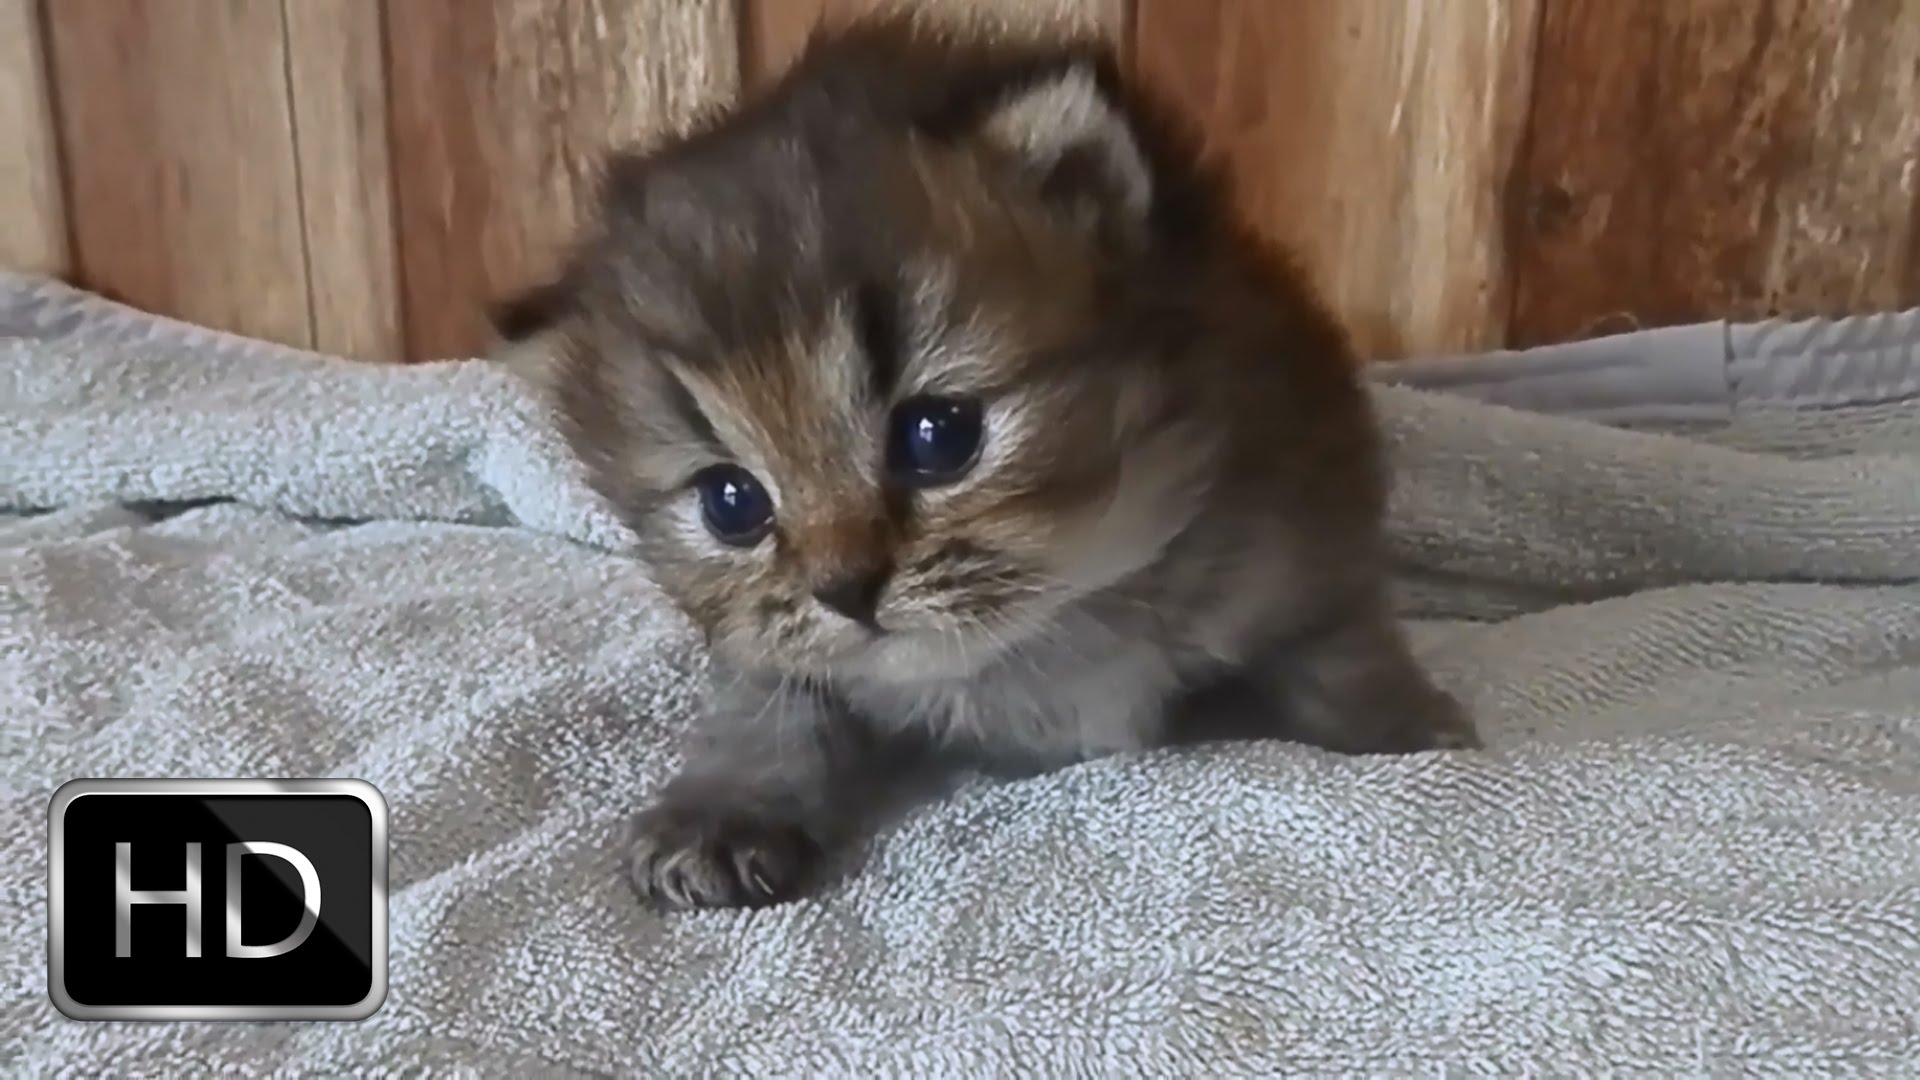 Little Kitten Meowing ( Very Adorable) - YouTube